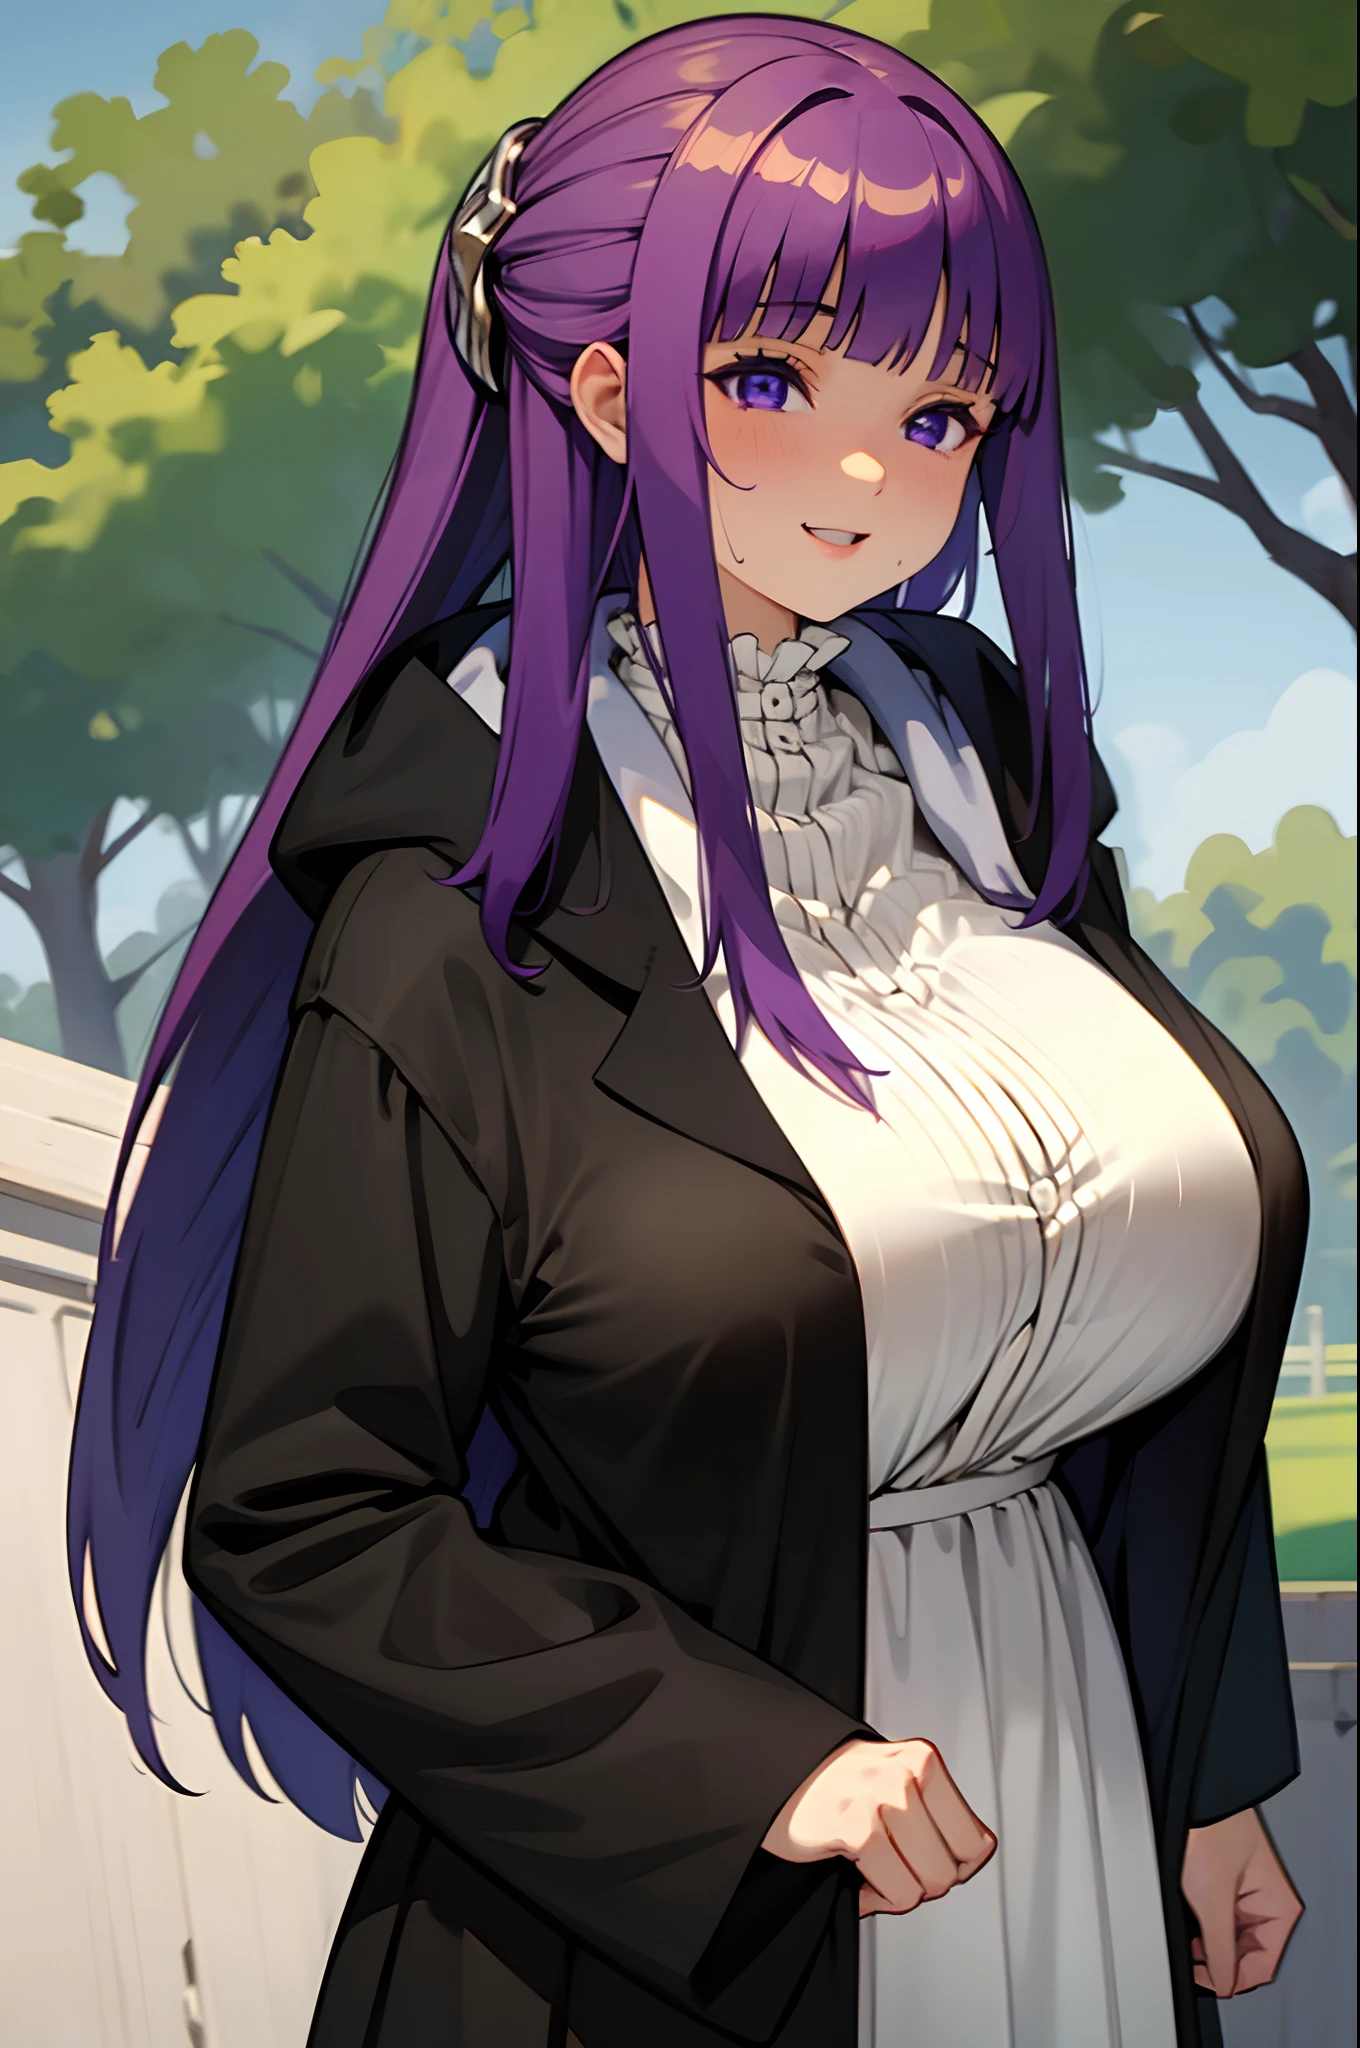 fern from frieren, anime, big breasts, white dress, long black coat, smiling, sexy, big breasts sagging under dress, sweaty, purple hair